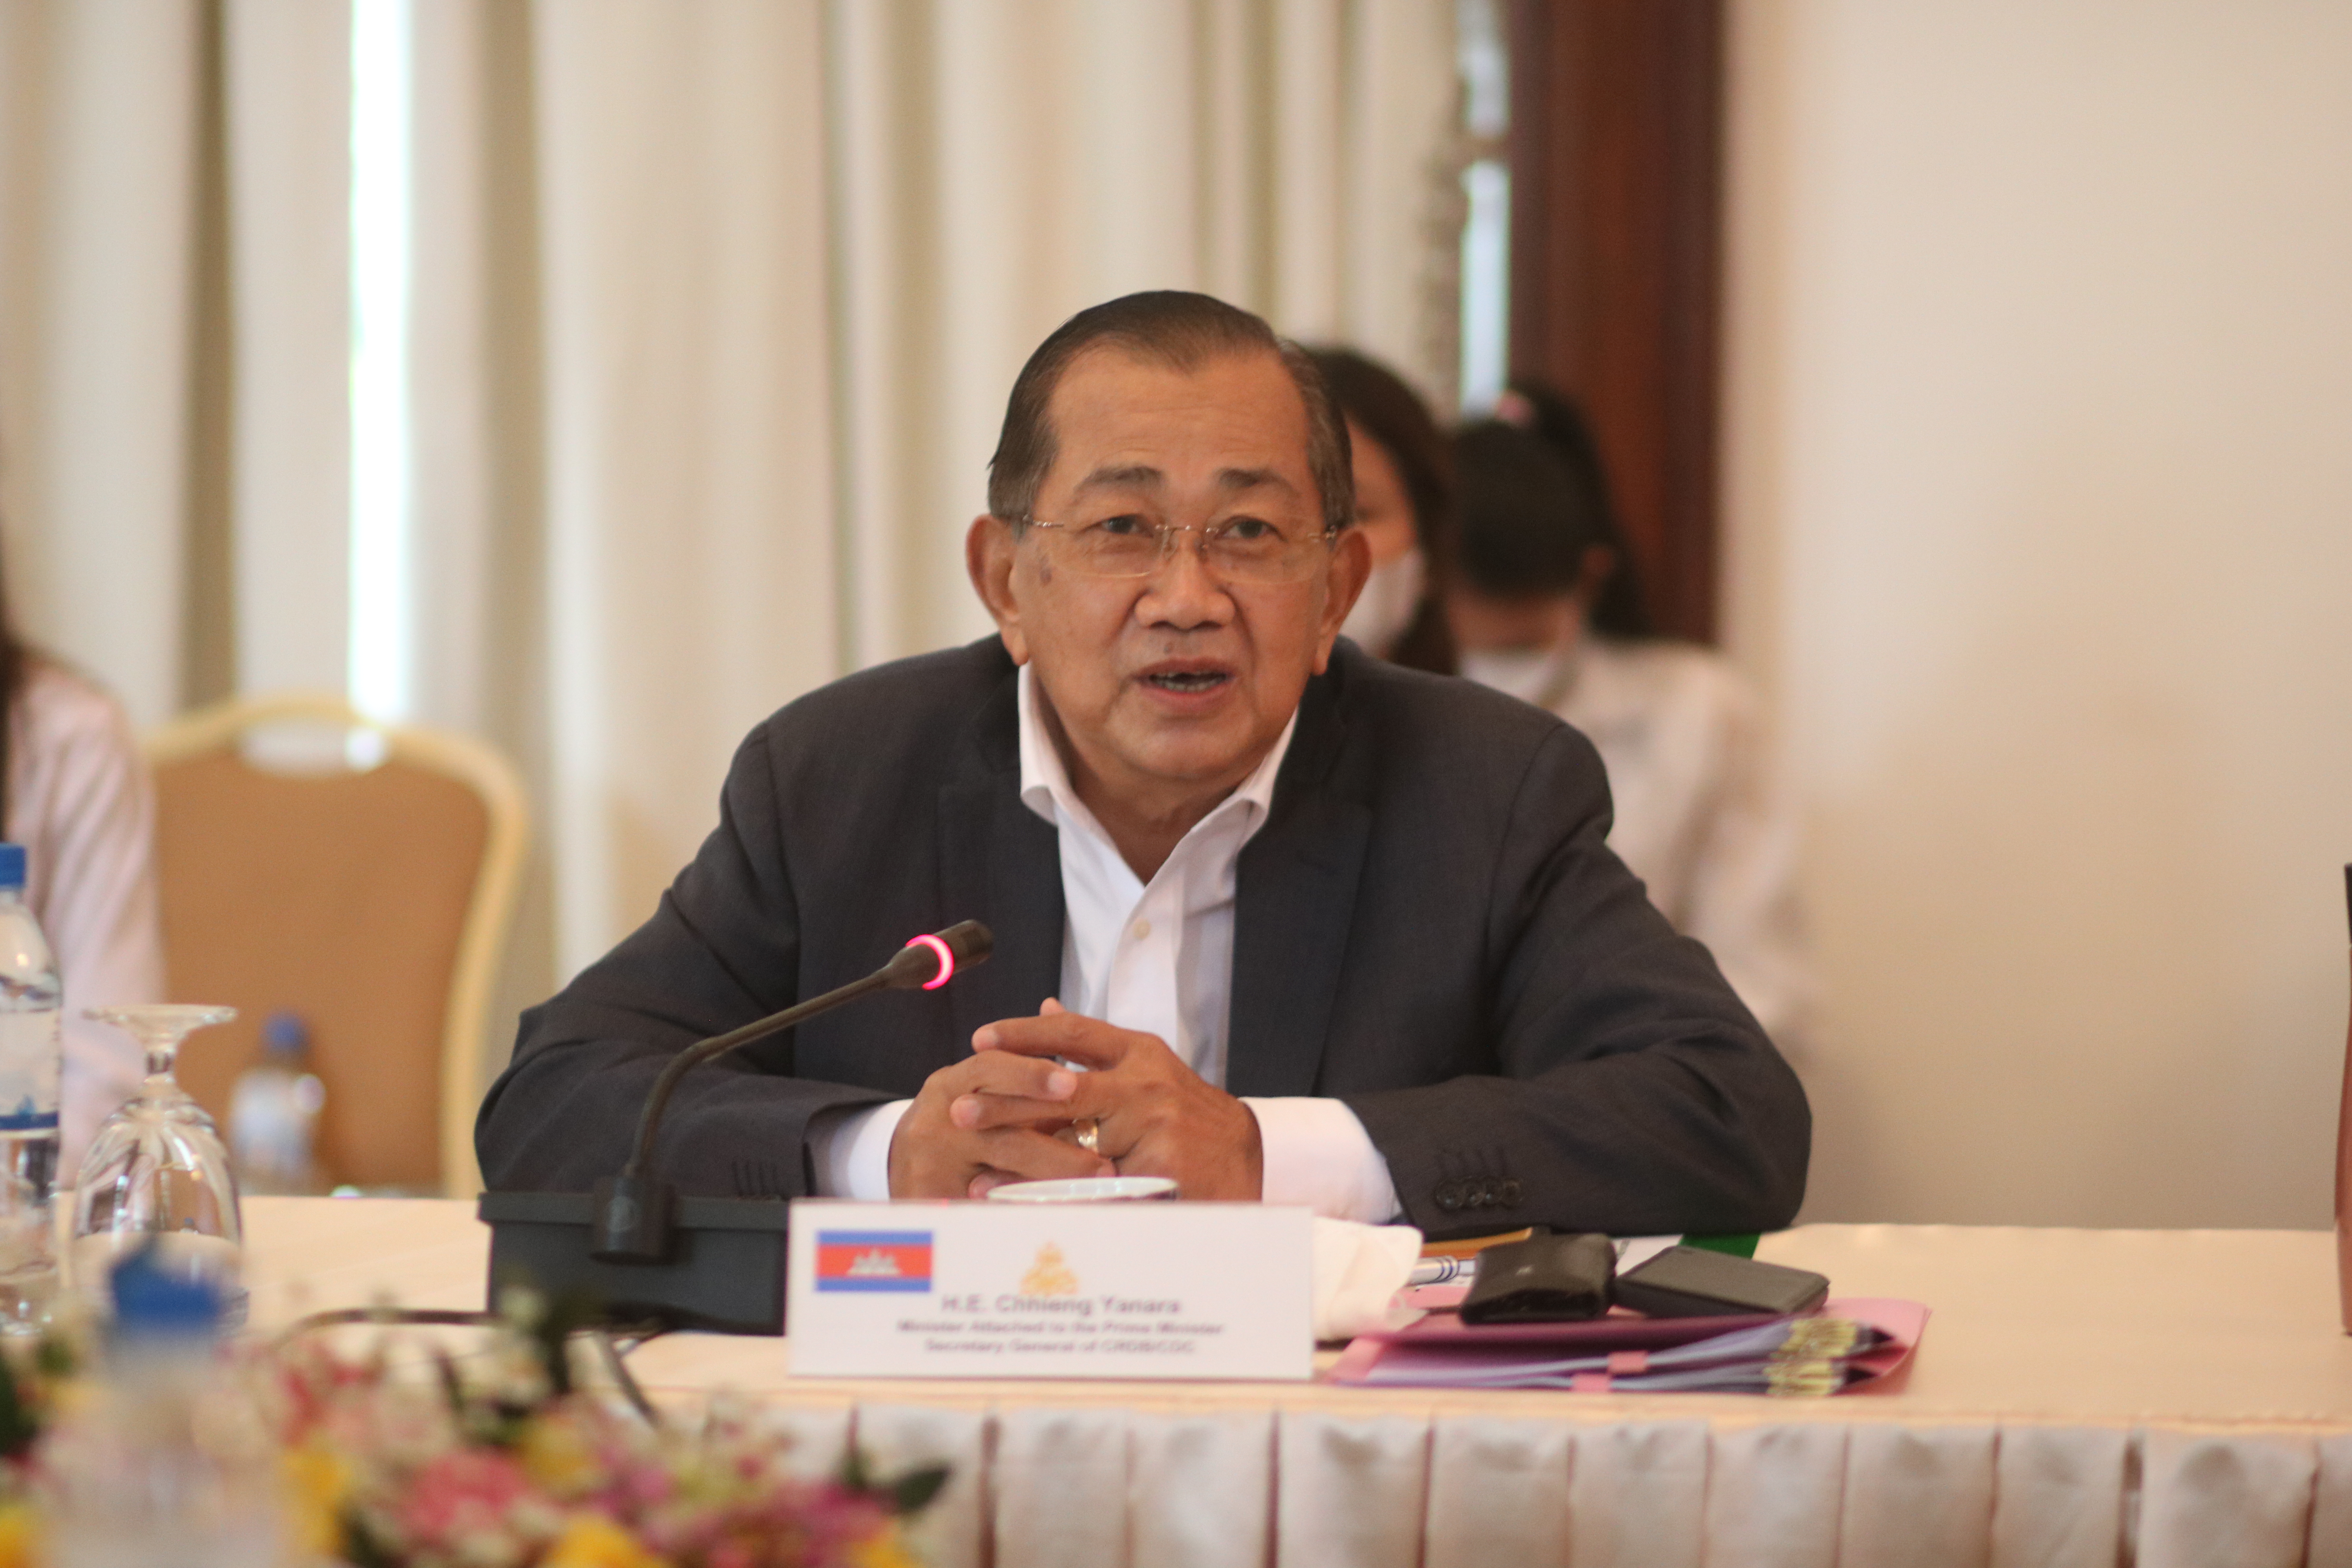 Inter-Ministerial Meeting to Prepare for Consultation on 2022 Development Cooperation between the Royal Government of Cambodia and the Government of Federal Republic of Germany